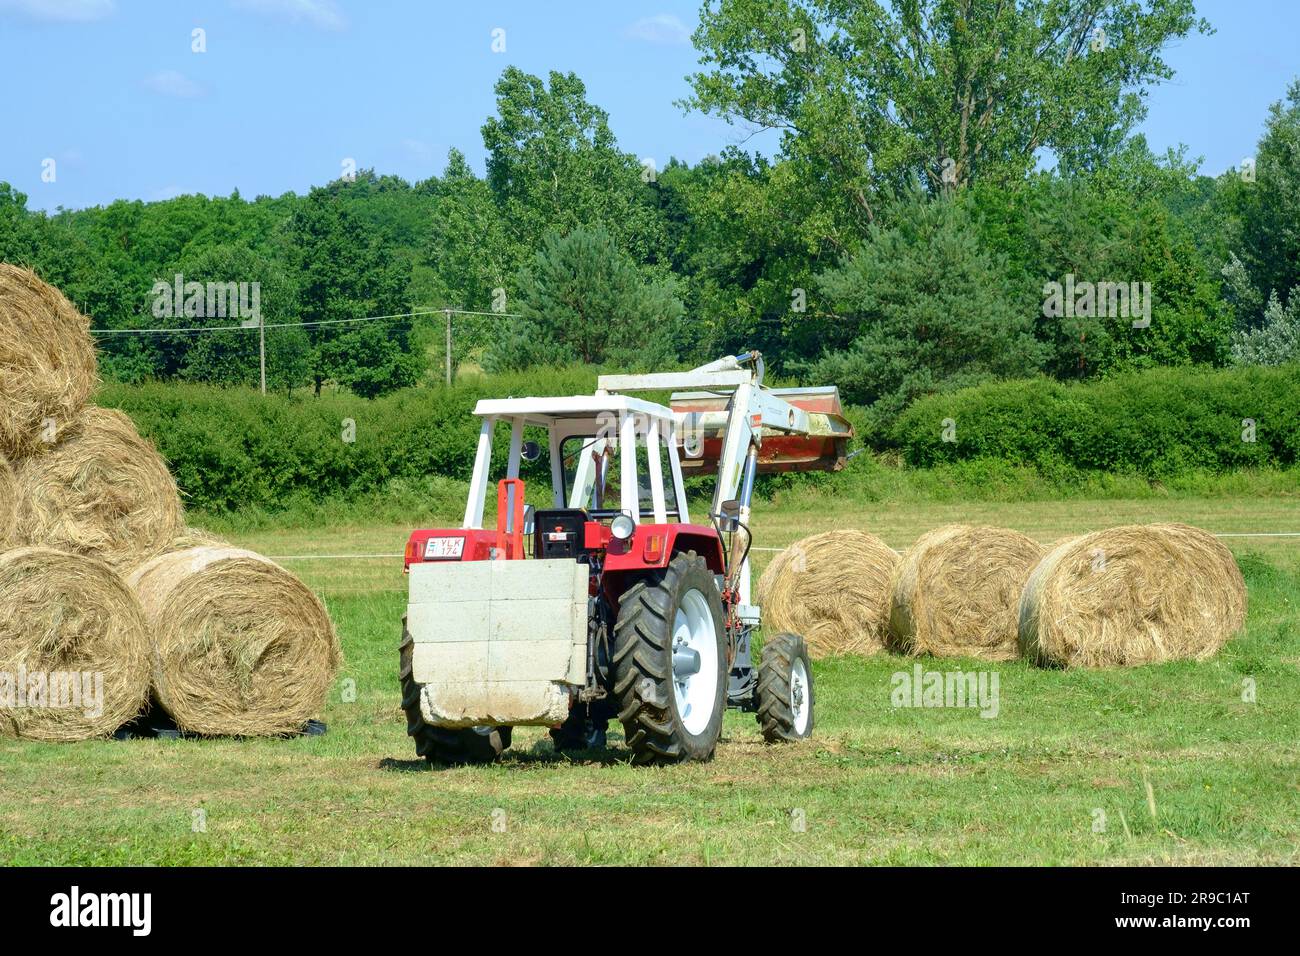 steyr 650 tractor being used to stack round hay bales after harvesting zala county hungary Stock Photo